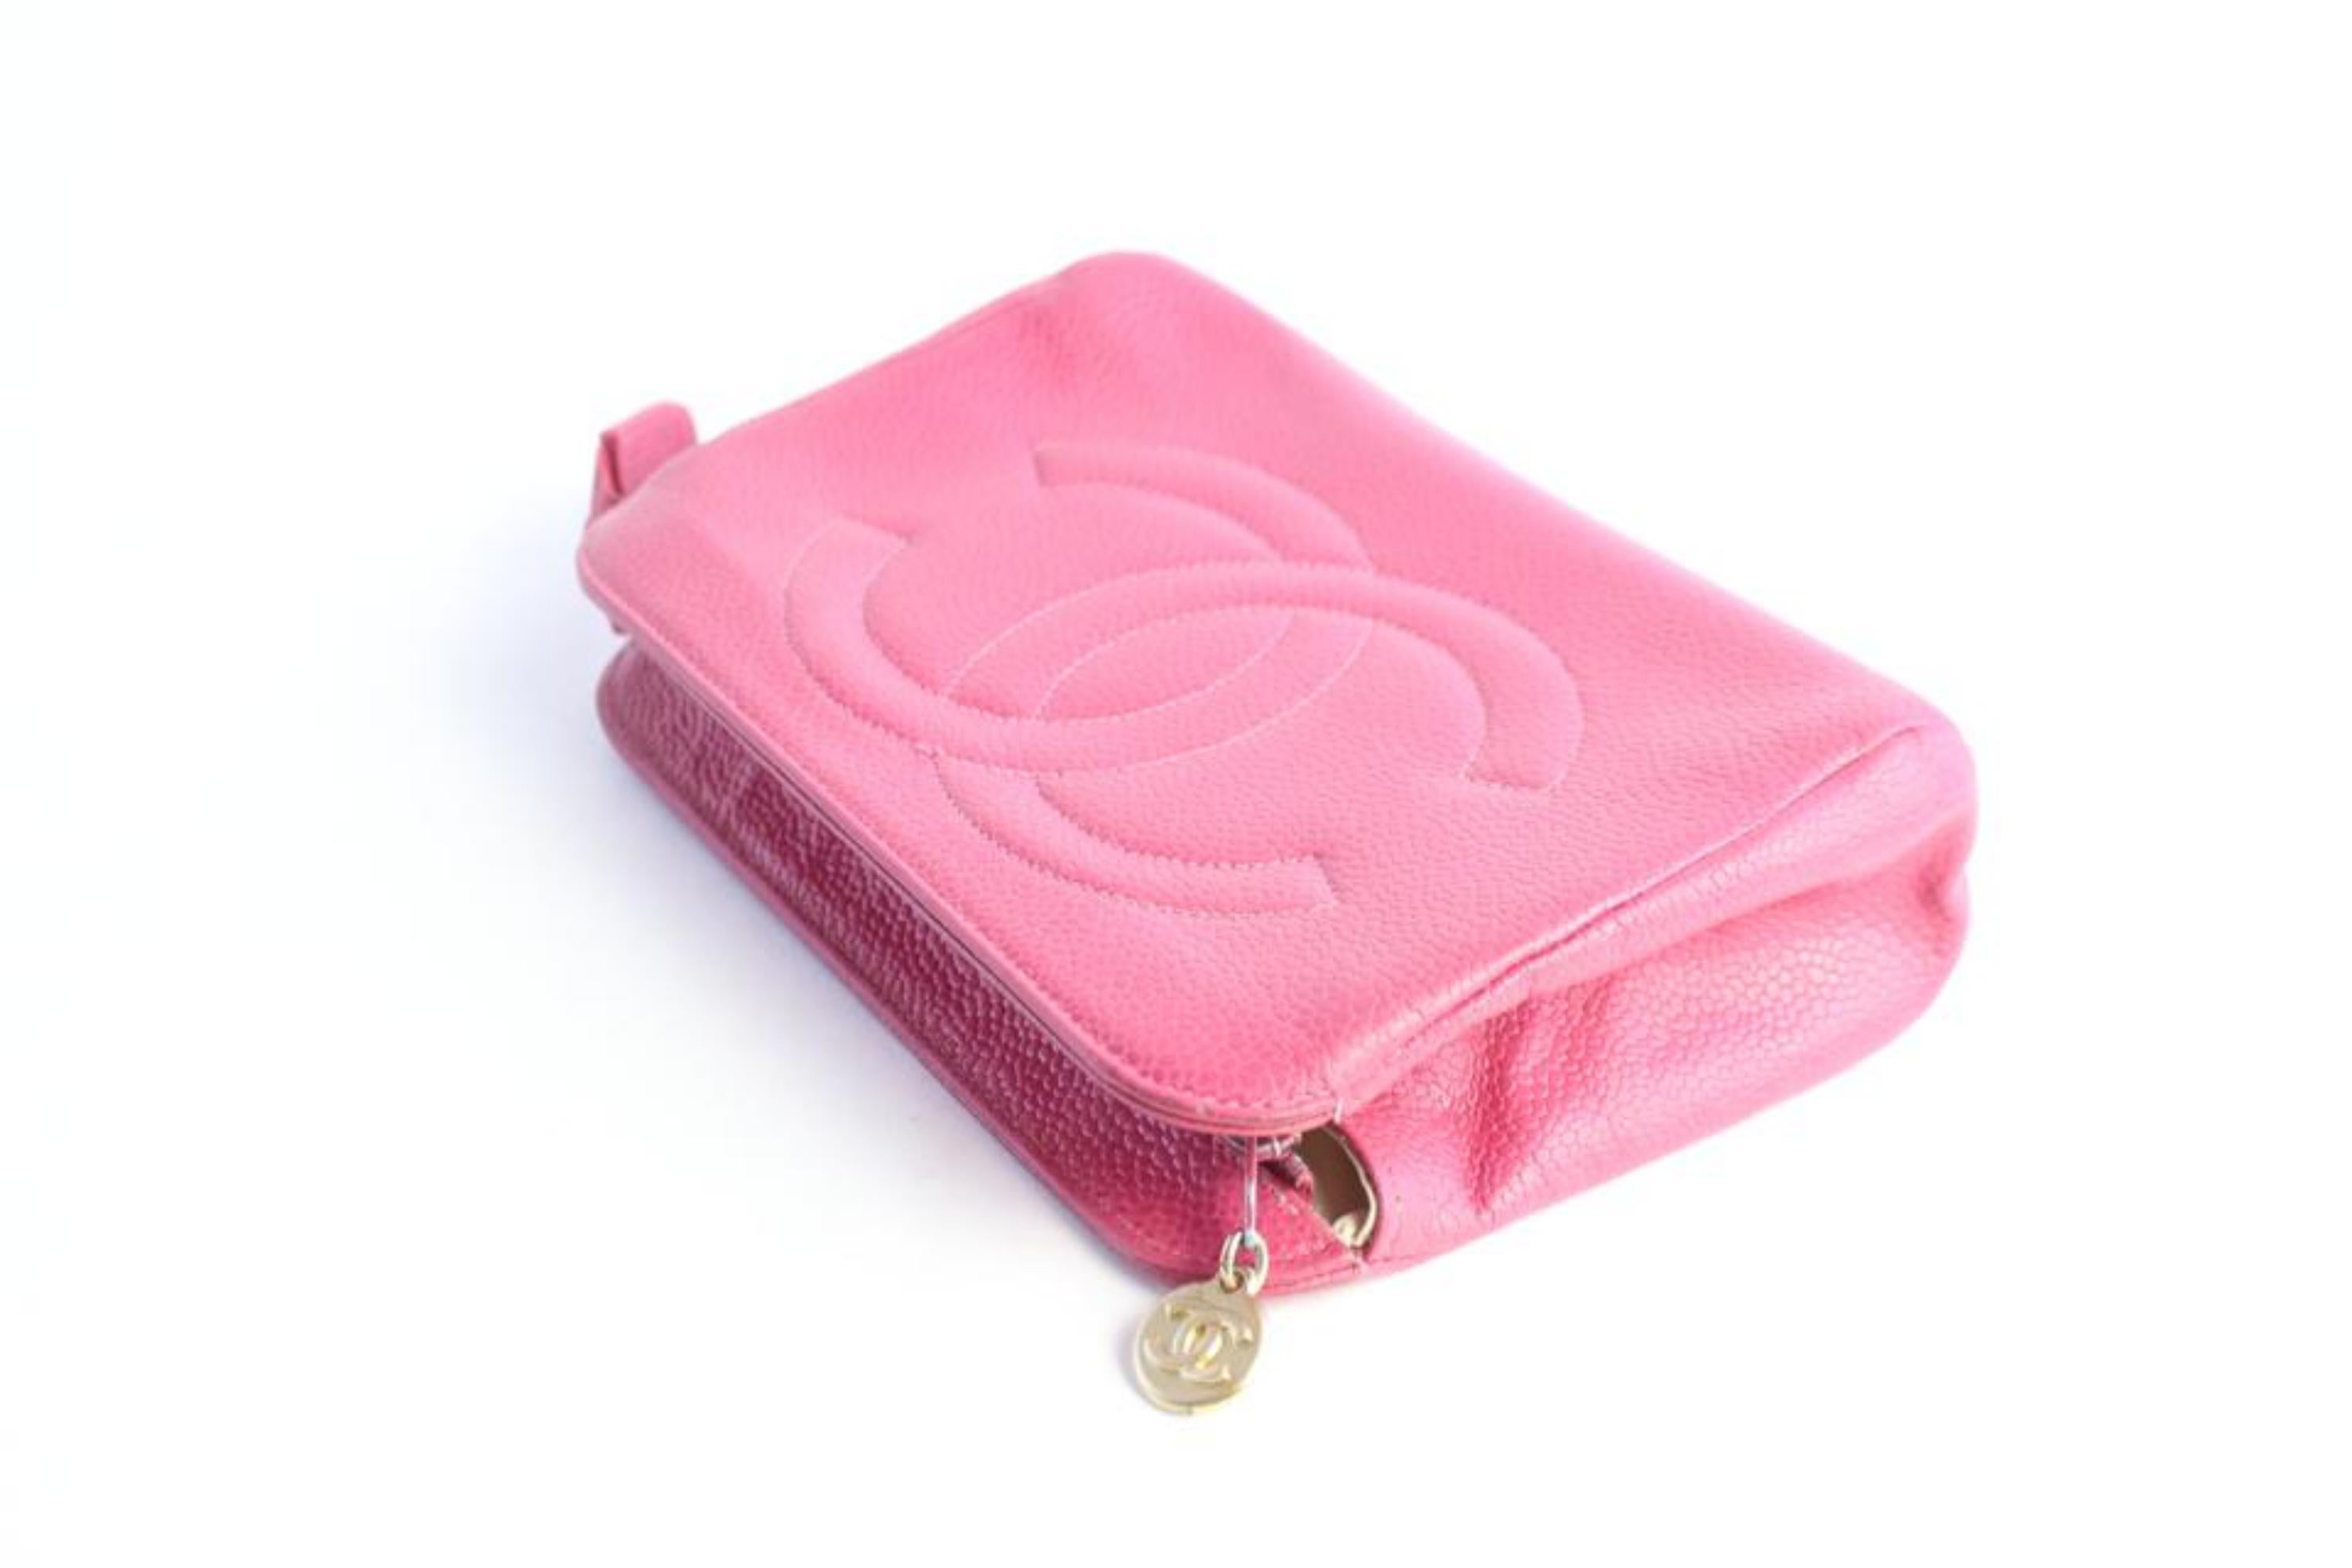 Chanel Cosmetic Hot Dark Zip Pouch 6cz0821 Pink Leather Clutch For Sale 1